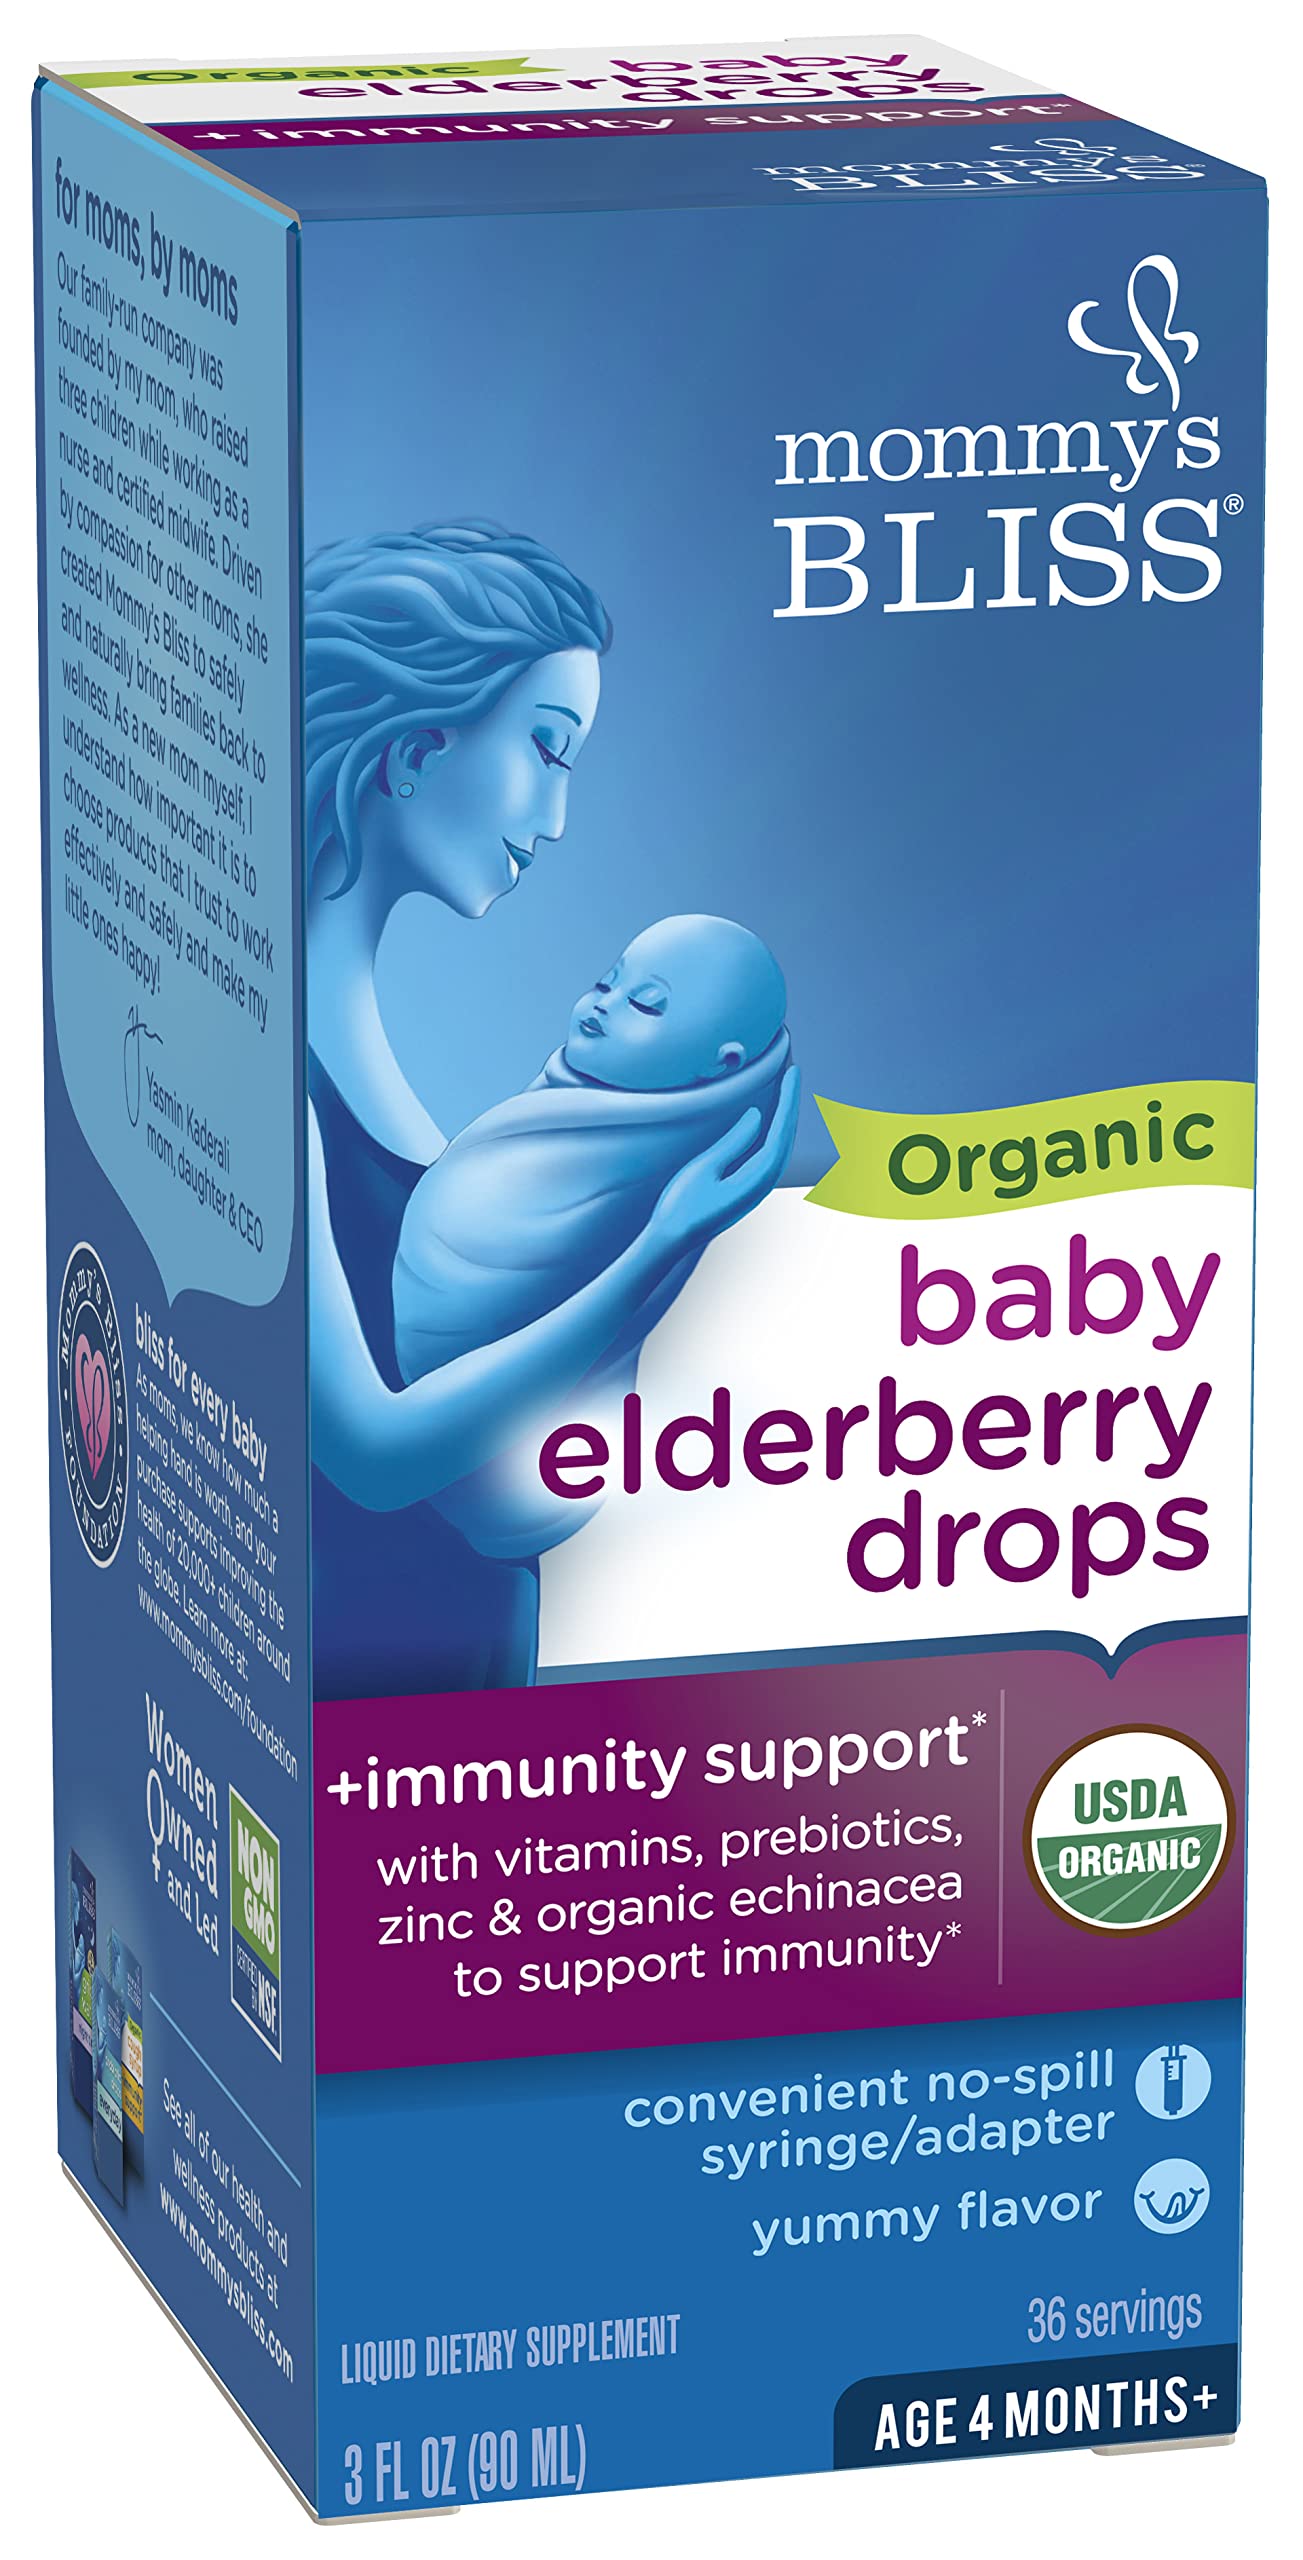 Mommy's Bliss Organic Baby Elderberry Drops, Immune Support with Vitamins, Prebiotics, Zinc & Organic Echinacea, Age 4 Months +, 3 Fl Oz (36 Servings)